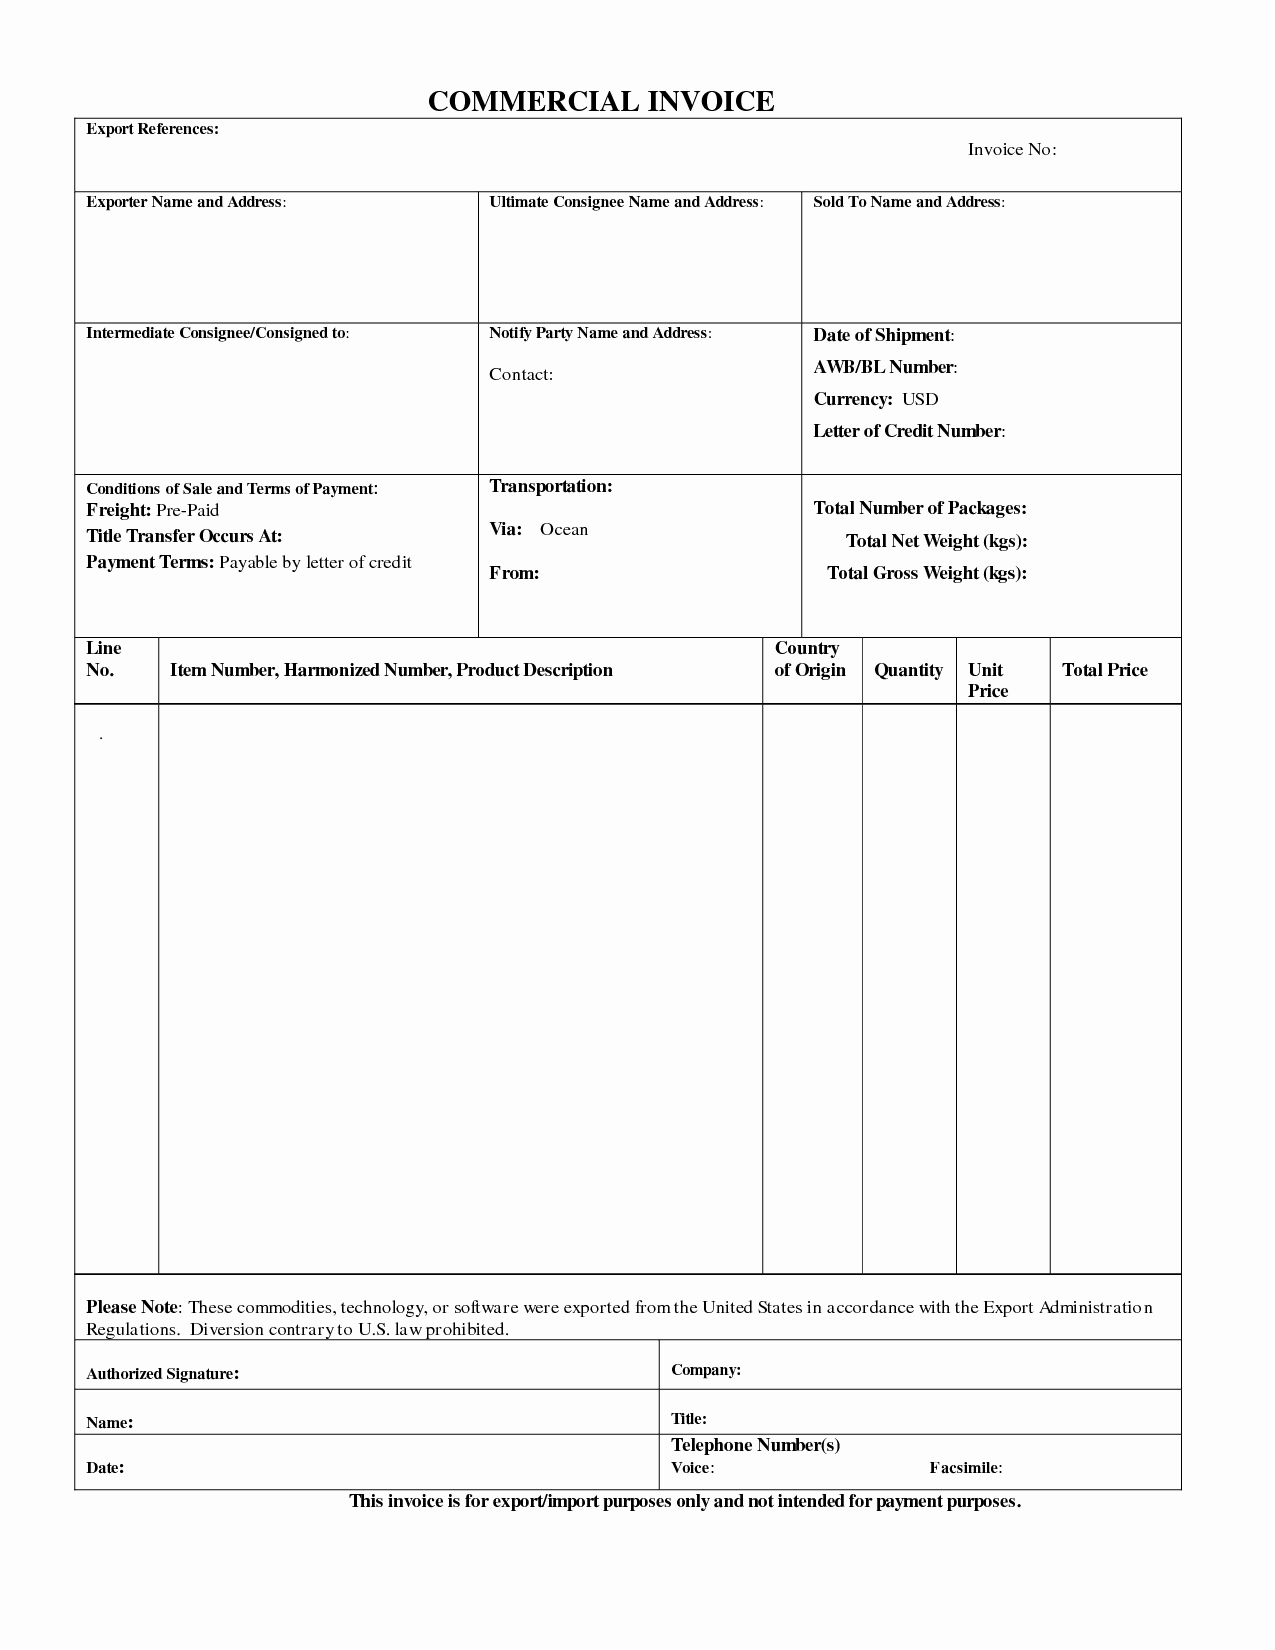 Free Commercial Invoice Template Fresh Mercial Export Invoice Sample Business form